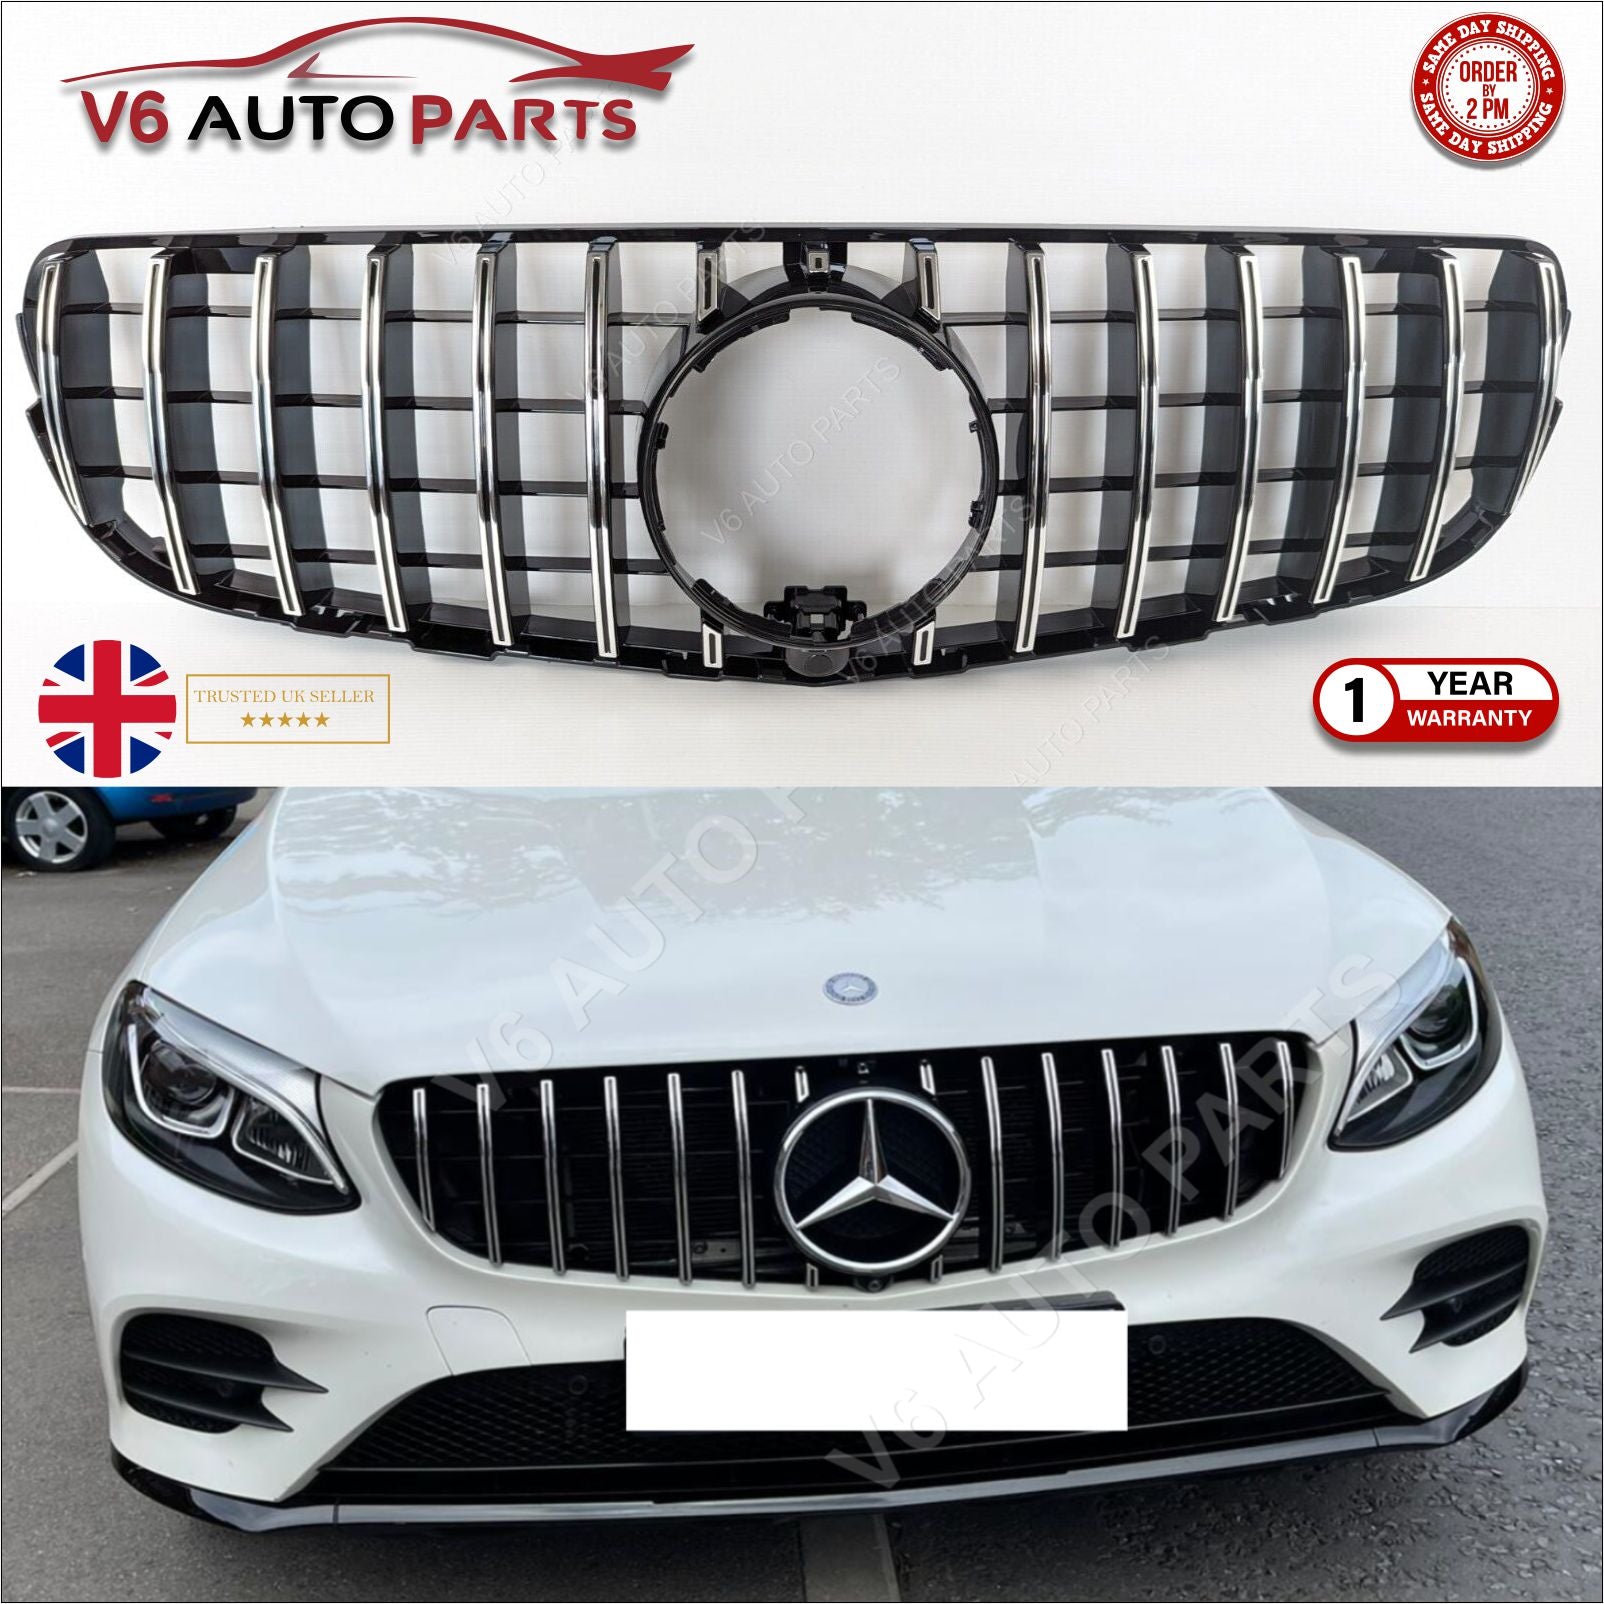 For Mercedes GLC-Class X253 GLC220 300 GT 43 Grill Front Radiator Grille 2015-19